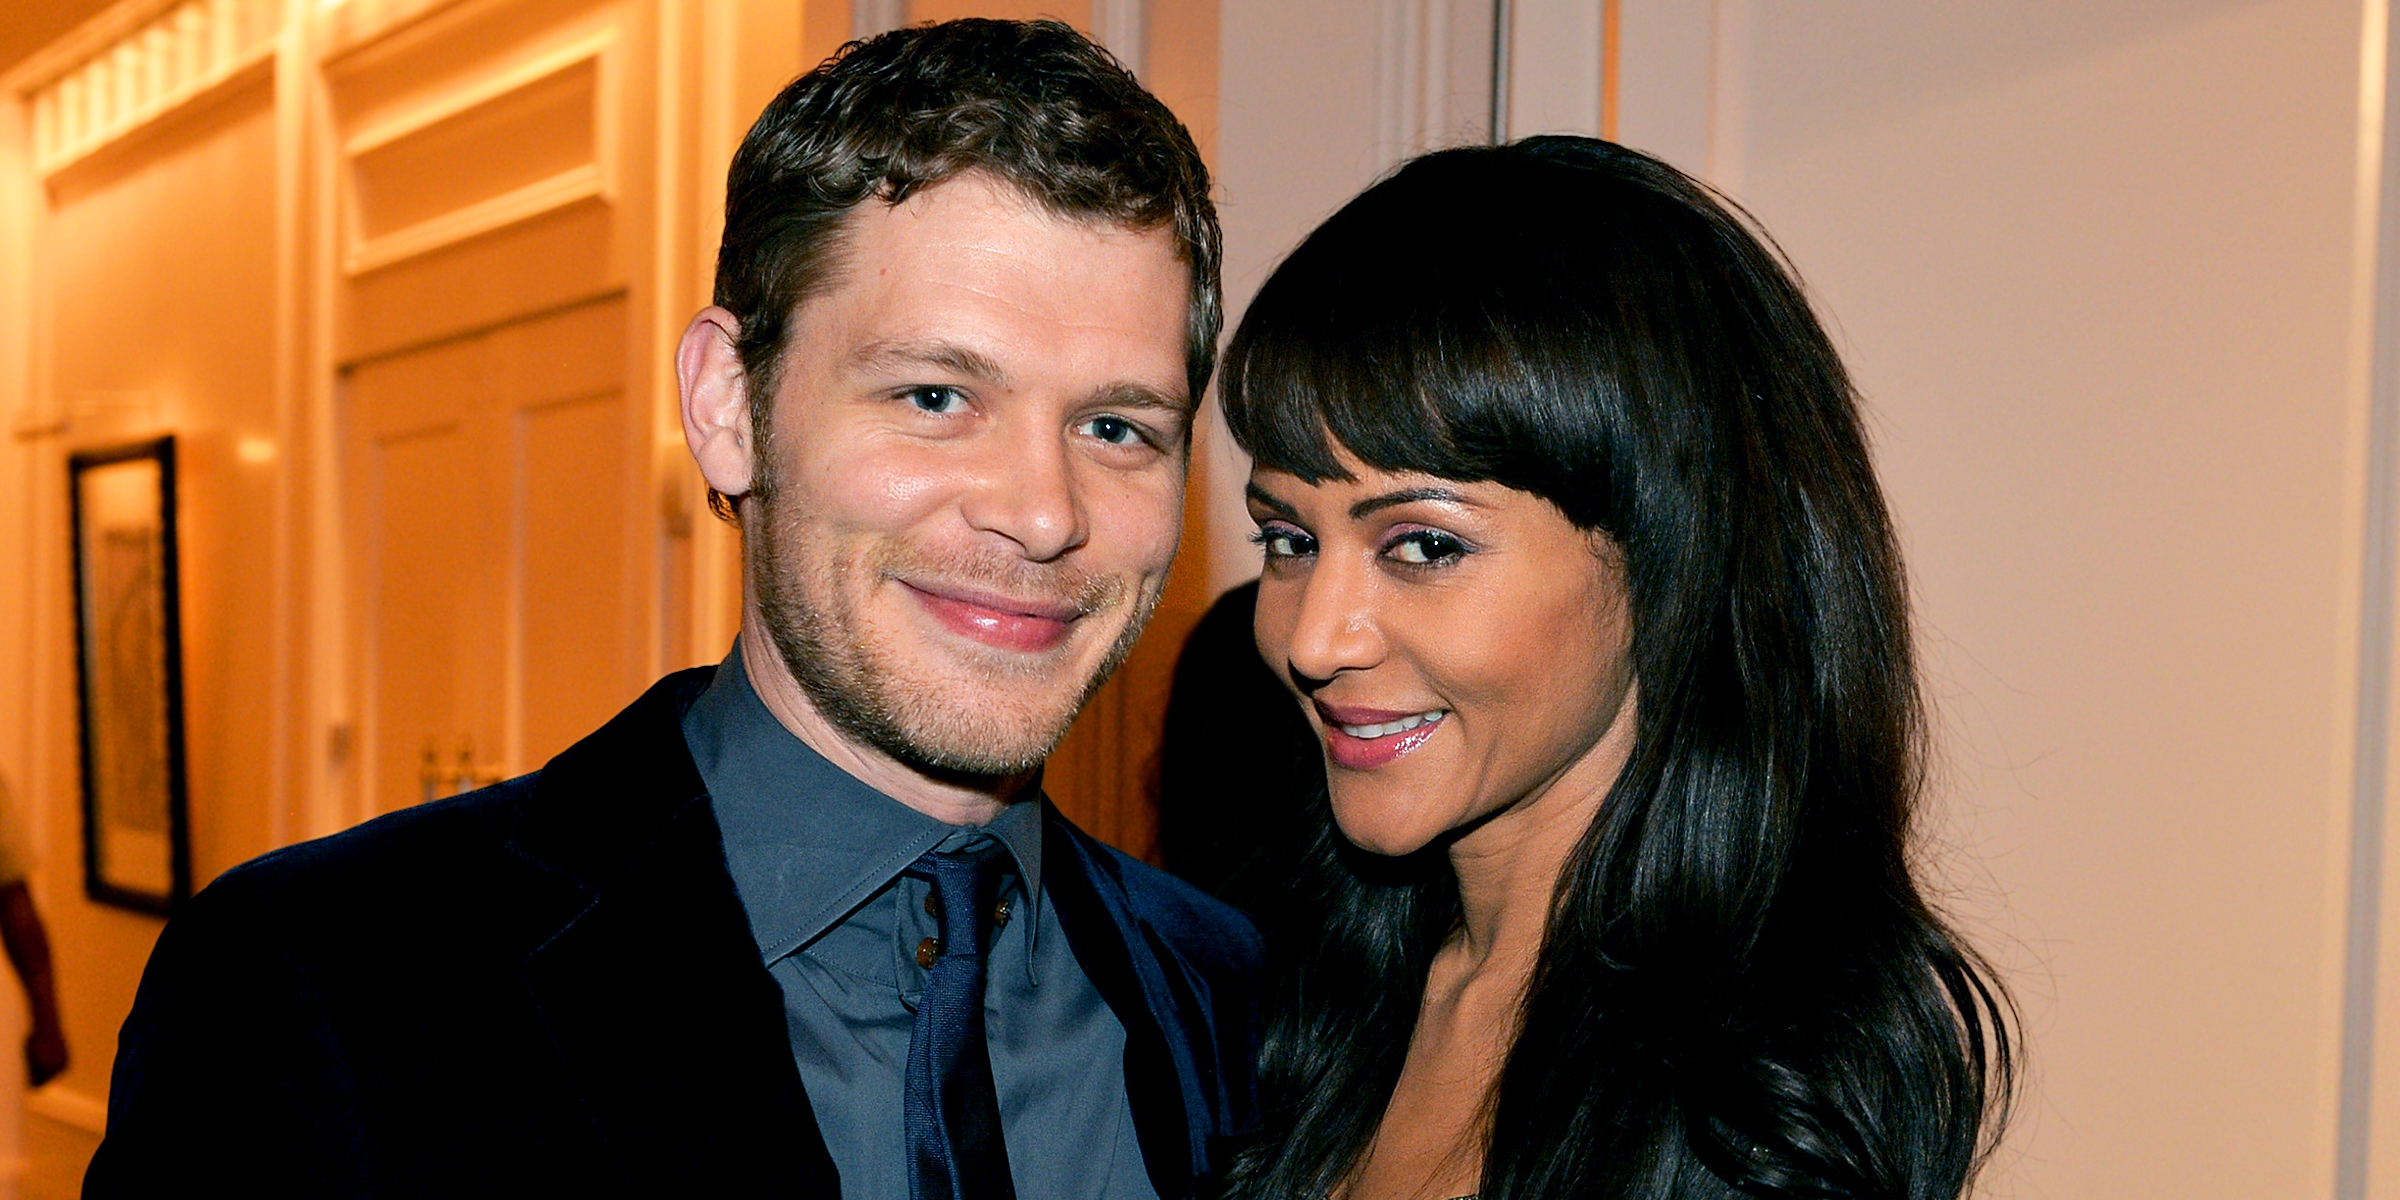 Joseph Morgan and Persia White. | Source: Getty Images